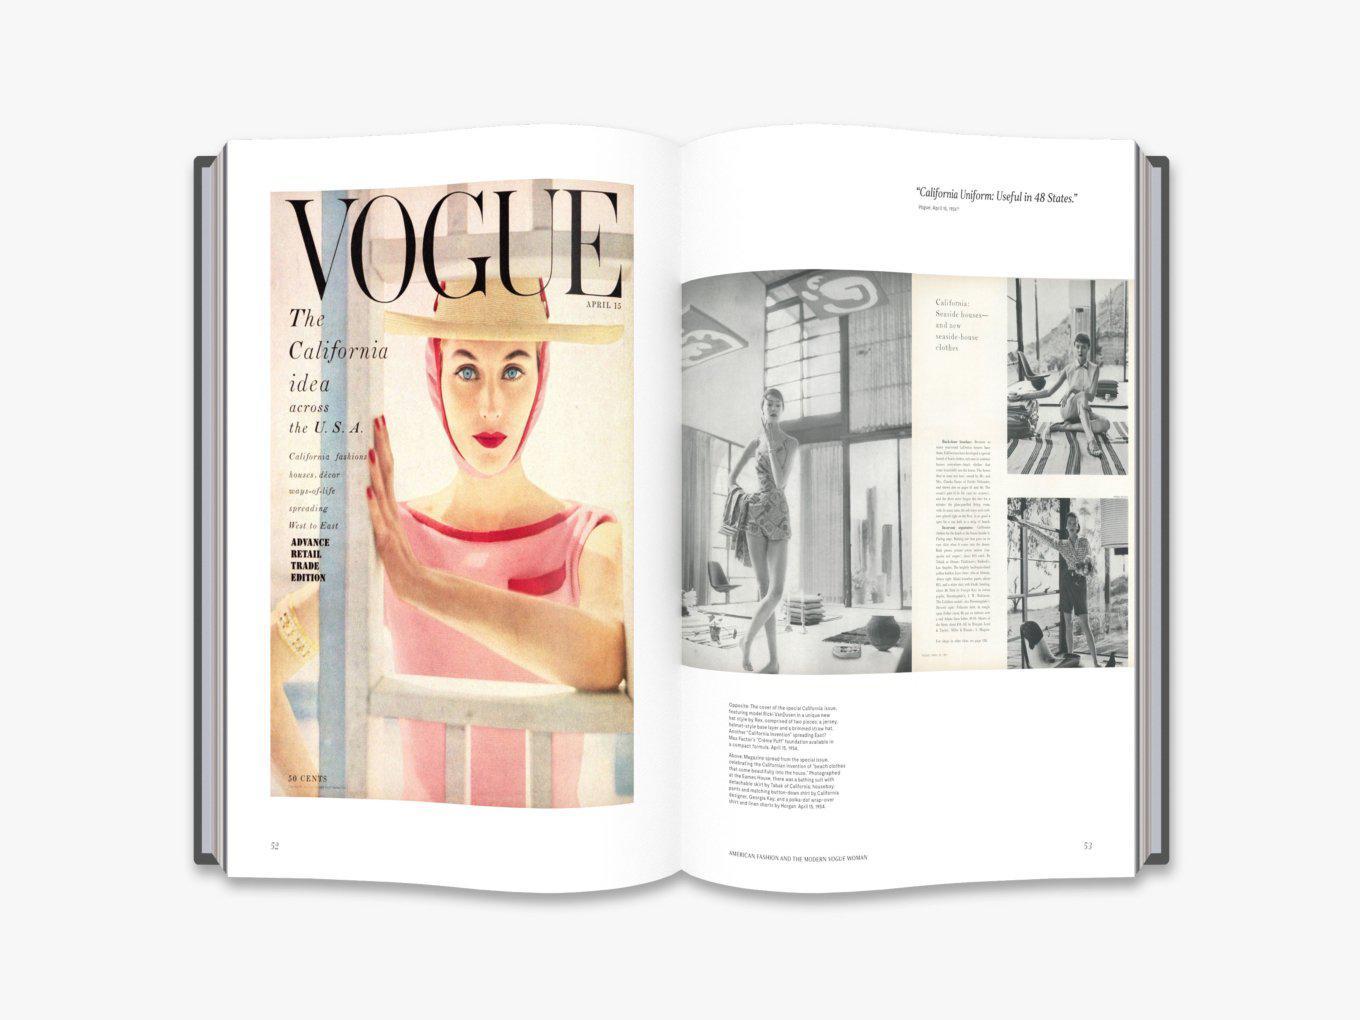 THAMES & HUDSON - 1950s in Vogue The Jessica Daves Years - Coffee Table Book-TOJU Interior